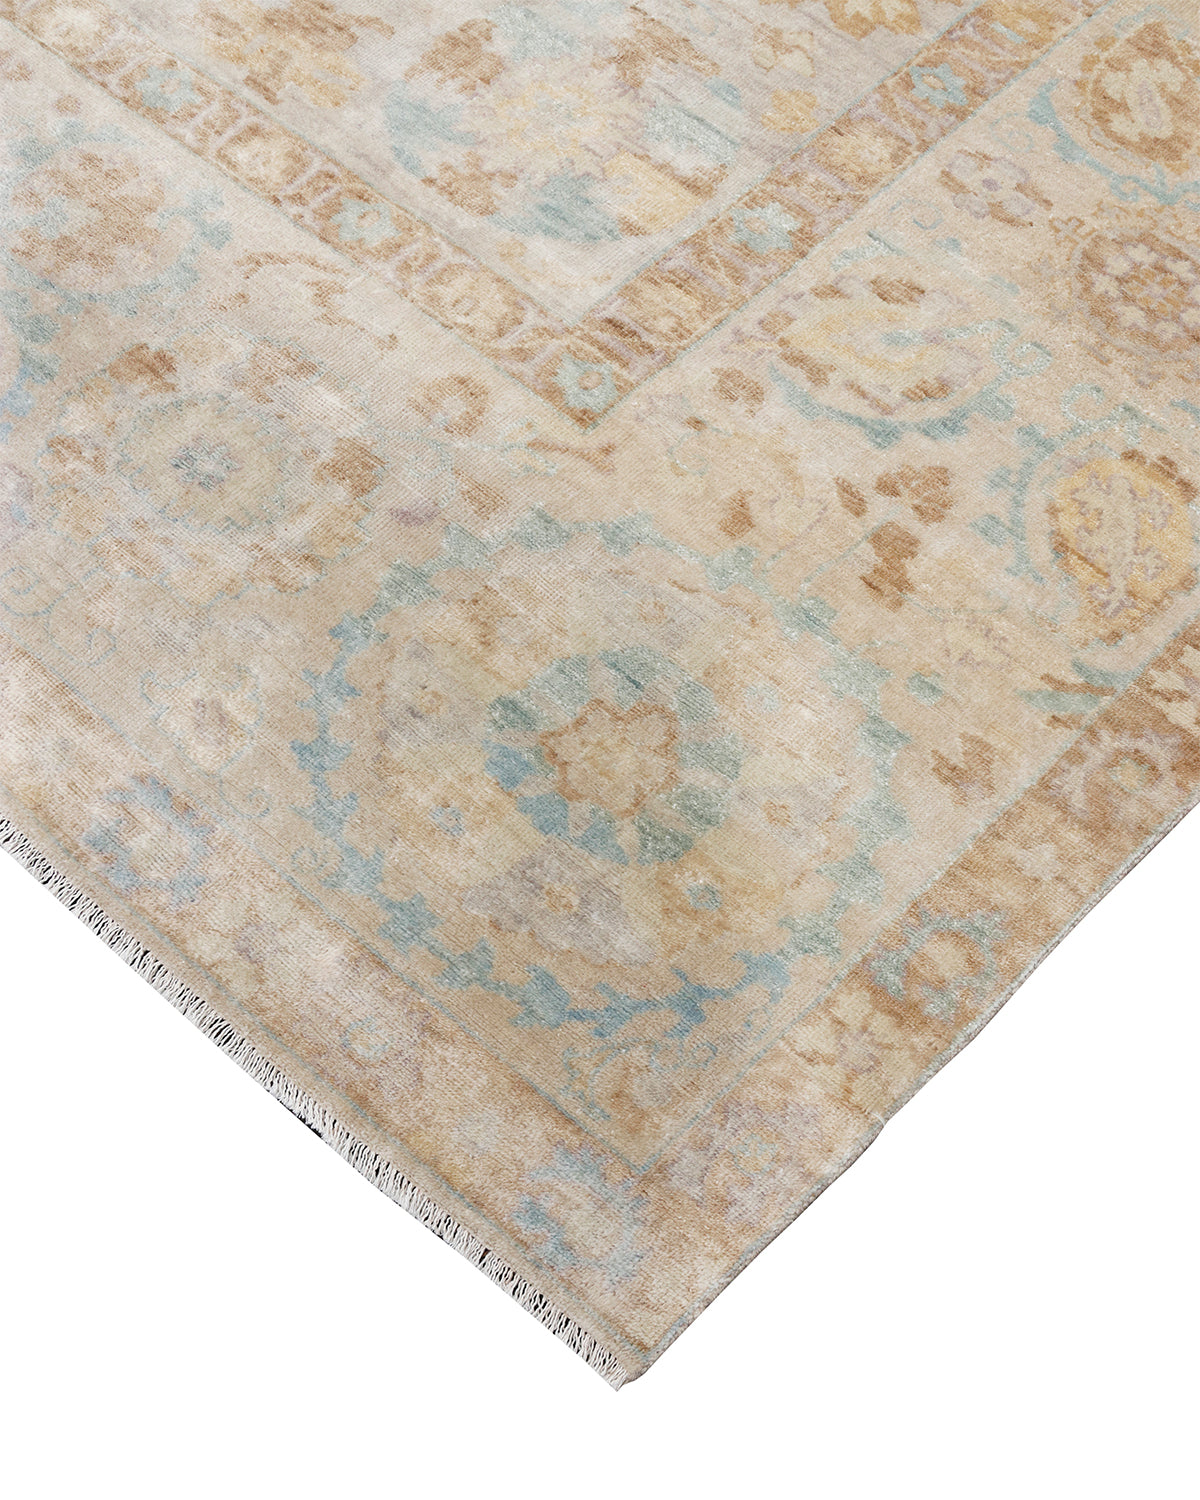 Traditional Hand-knotted Rug (SUZANI-2)